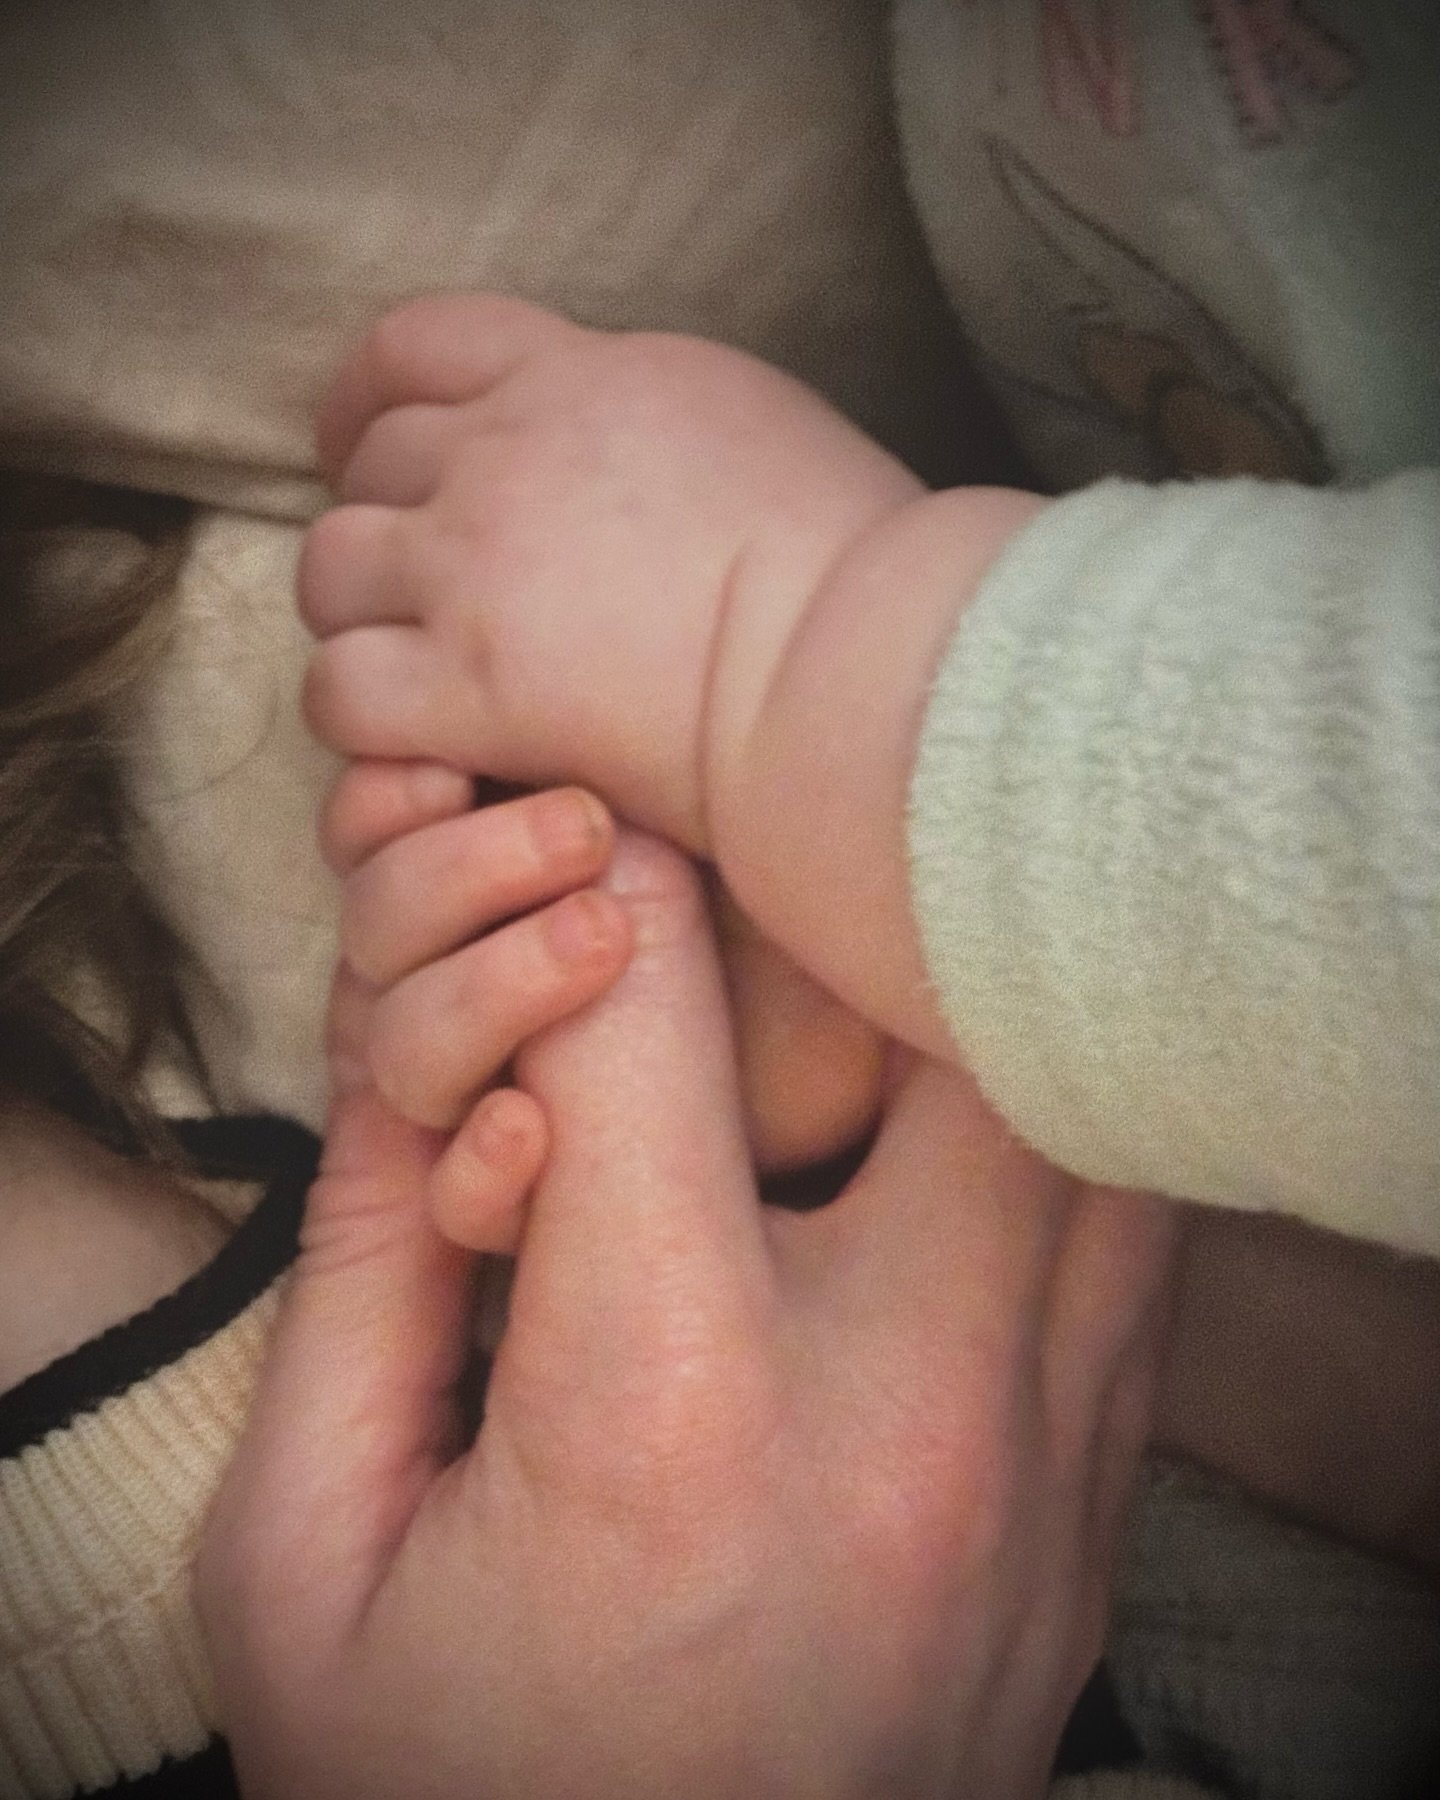 Seven years into sleep deprivation. As soon as one child slept, she passed the baton to the next. 

Could I be that unlucky, I ask?

Or perhaps the fact I have the privilege of holding this chubby, warm little hand in mine, listening to her breathing